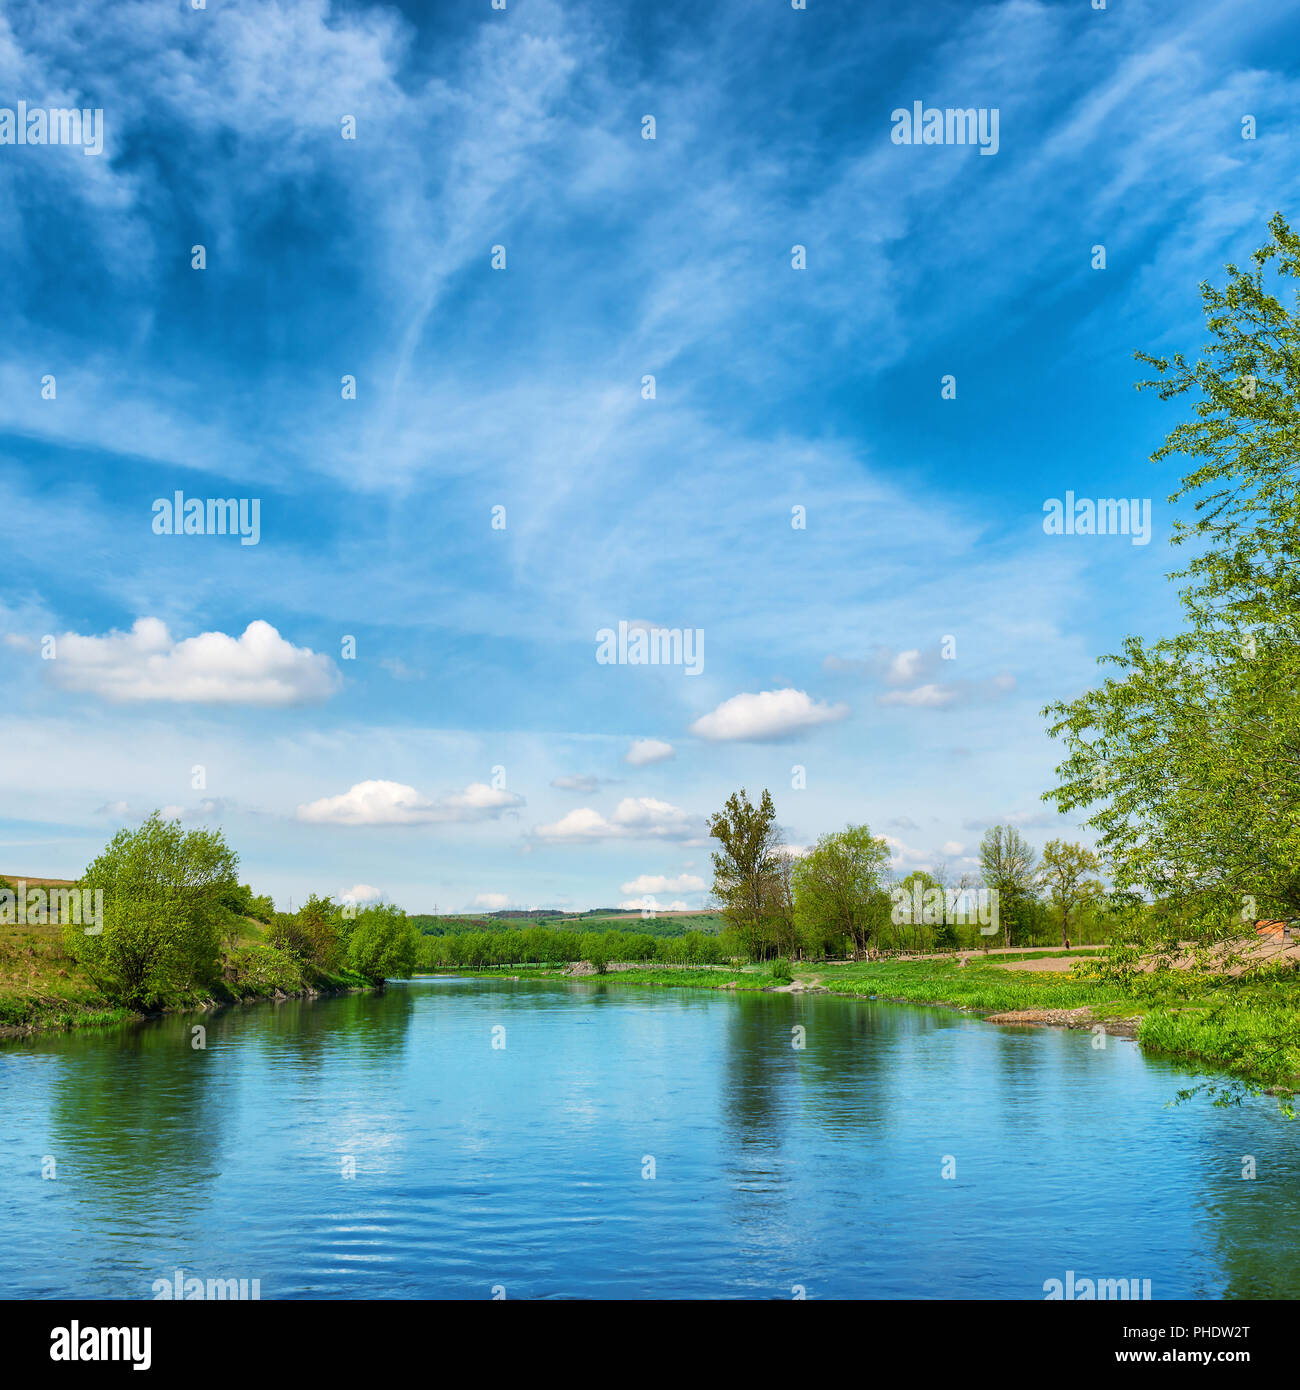 View to river banks with green trees Stock Photo